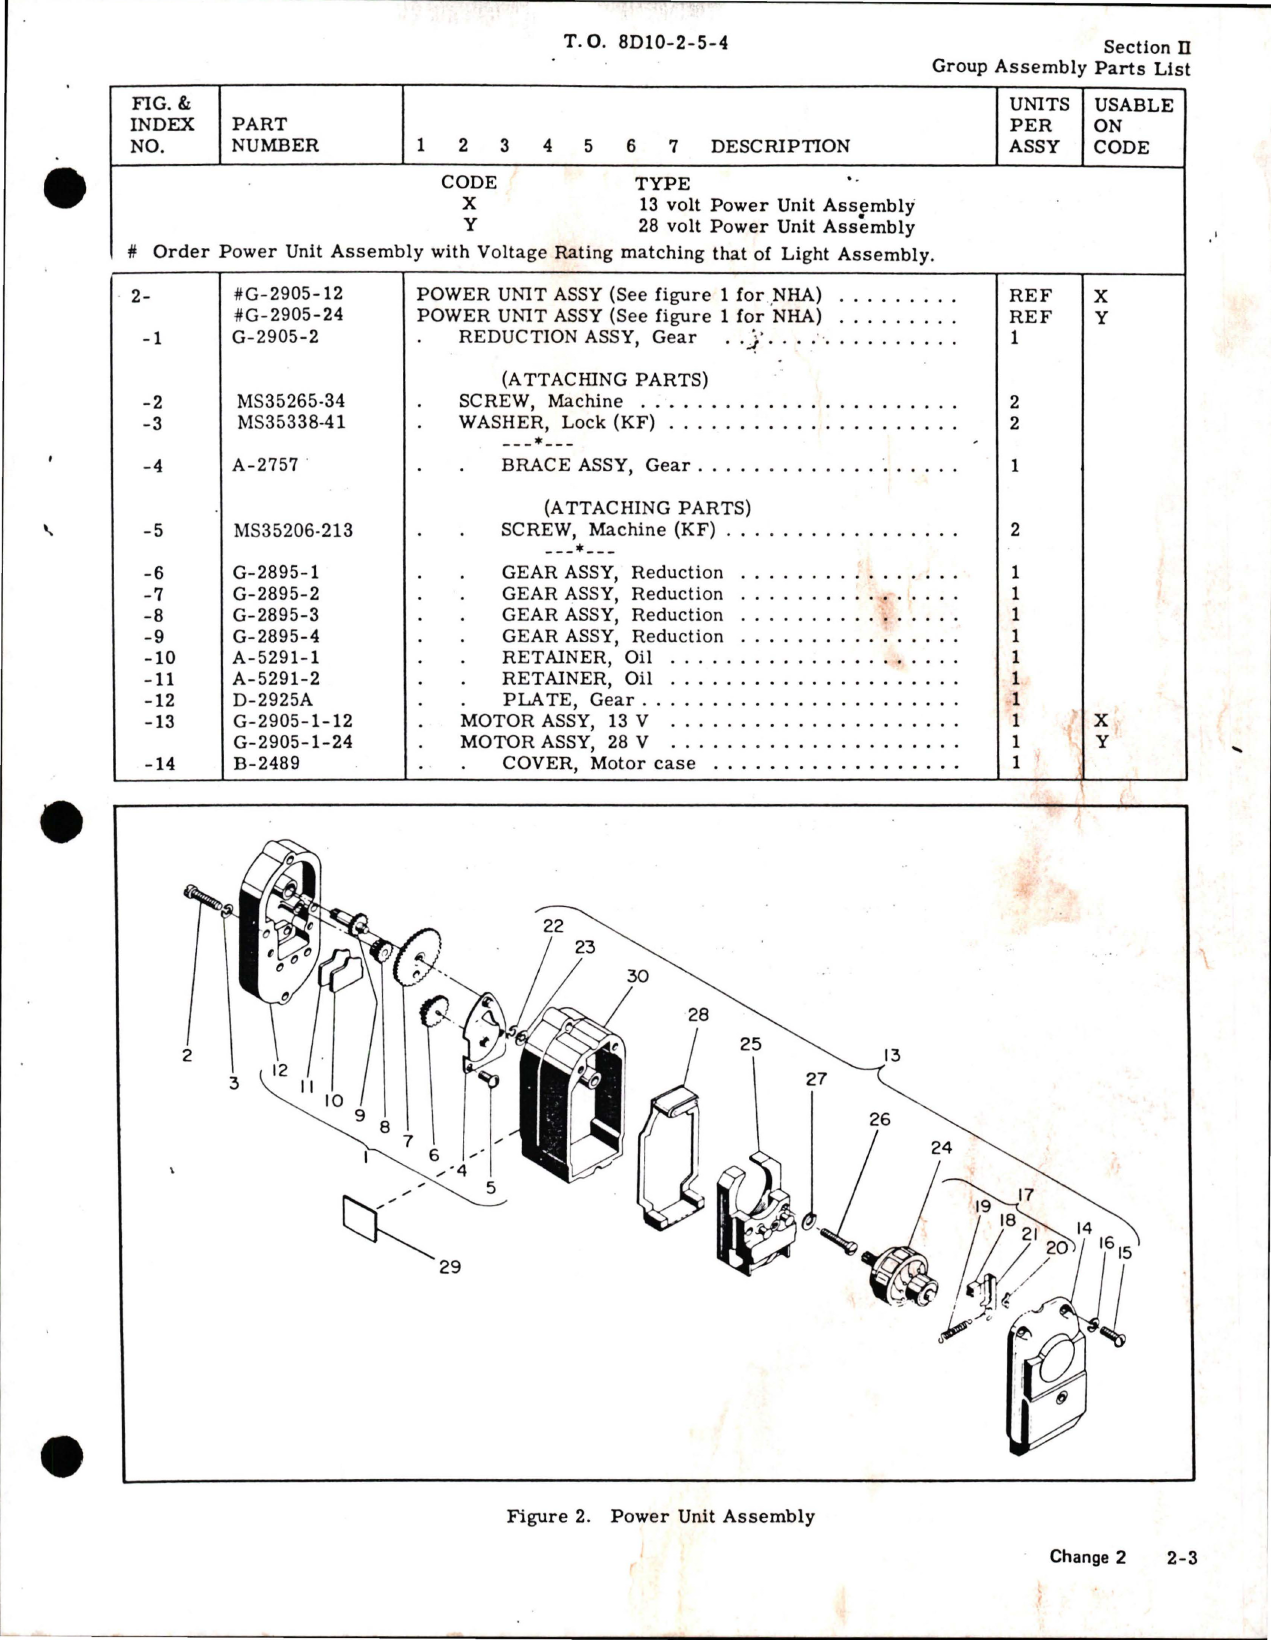 Sample page 5 from AirCorps Library document: Illustrated Parts Breakdown for Electrically Retractable Landing Light Assemblies - Part G-3800A Series - Change 2